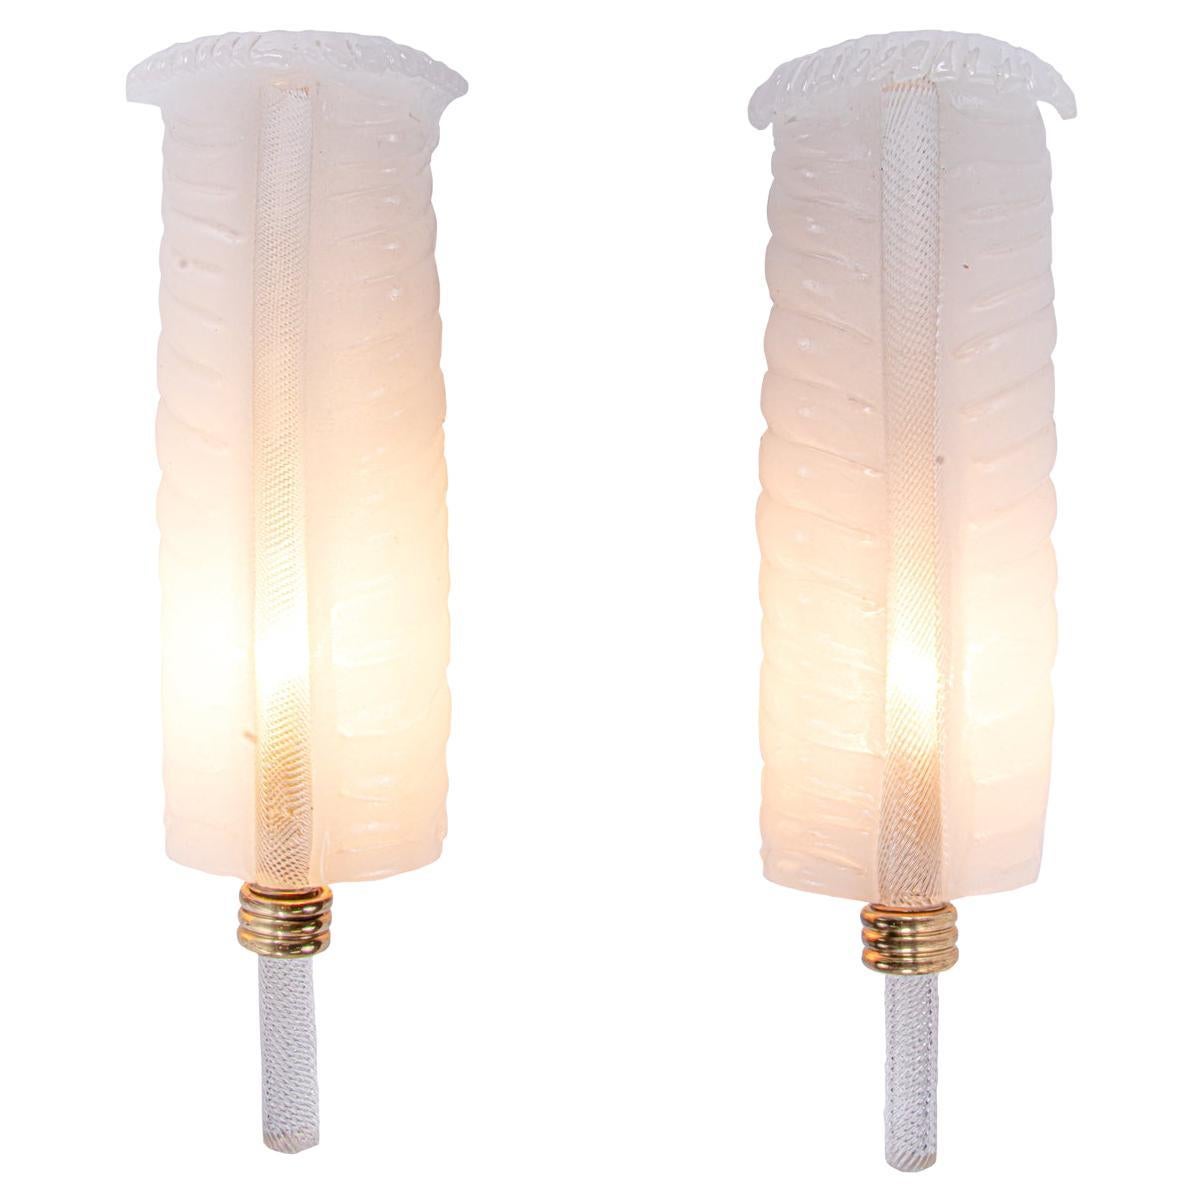 Pair of Murano Glass "Feather" Sconces by Tomaso Buzzi for Venini Italy, 1930s